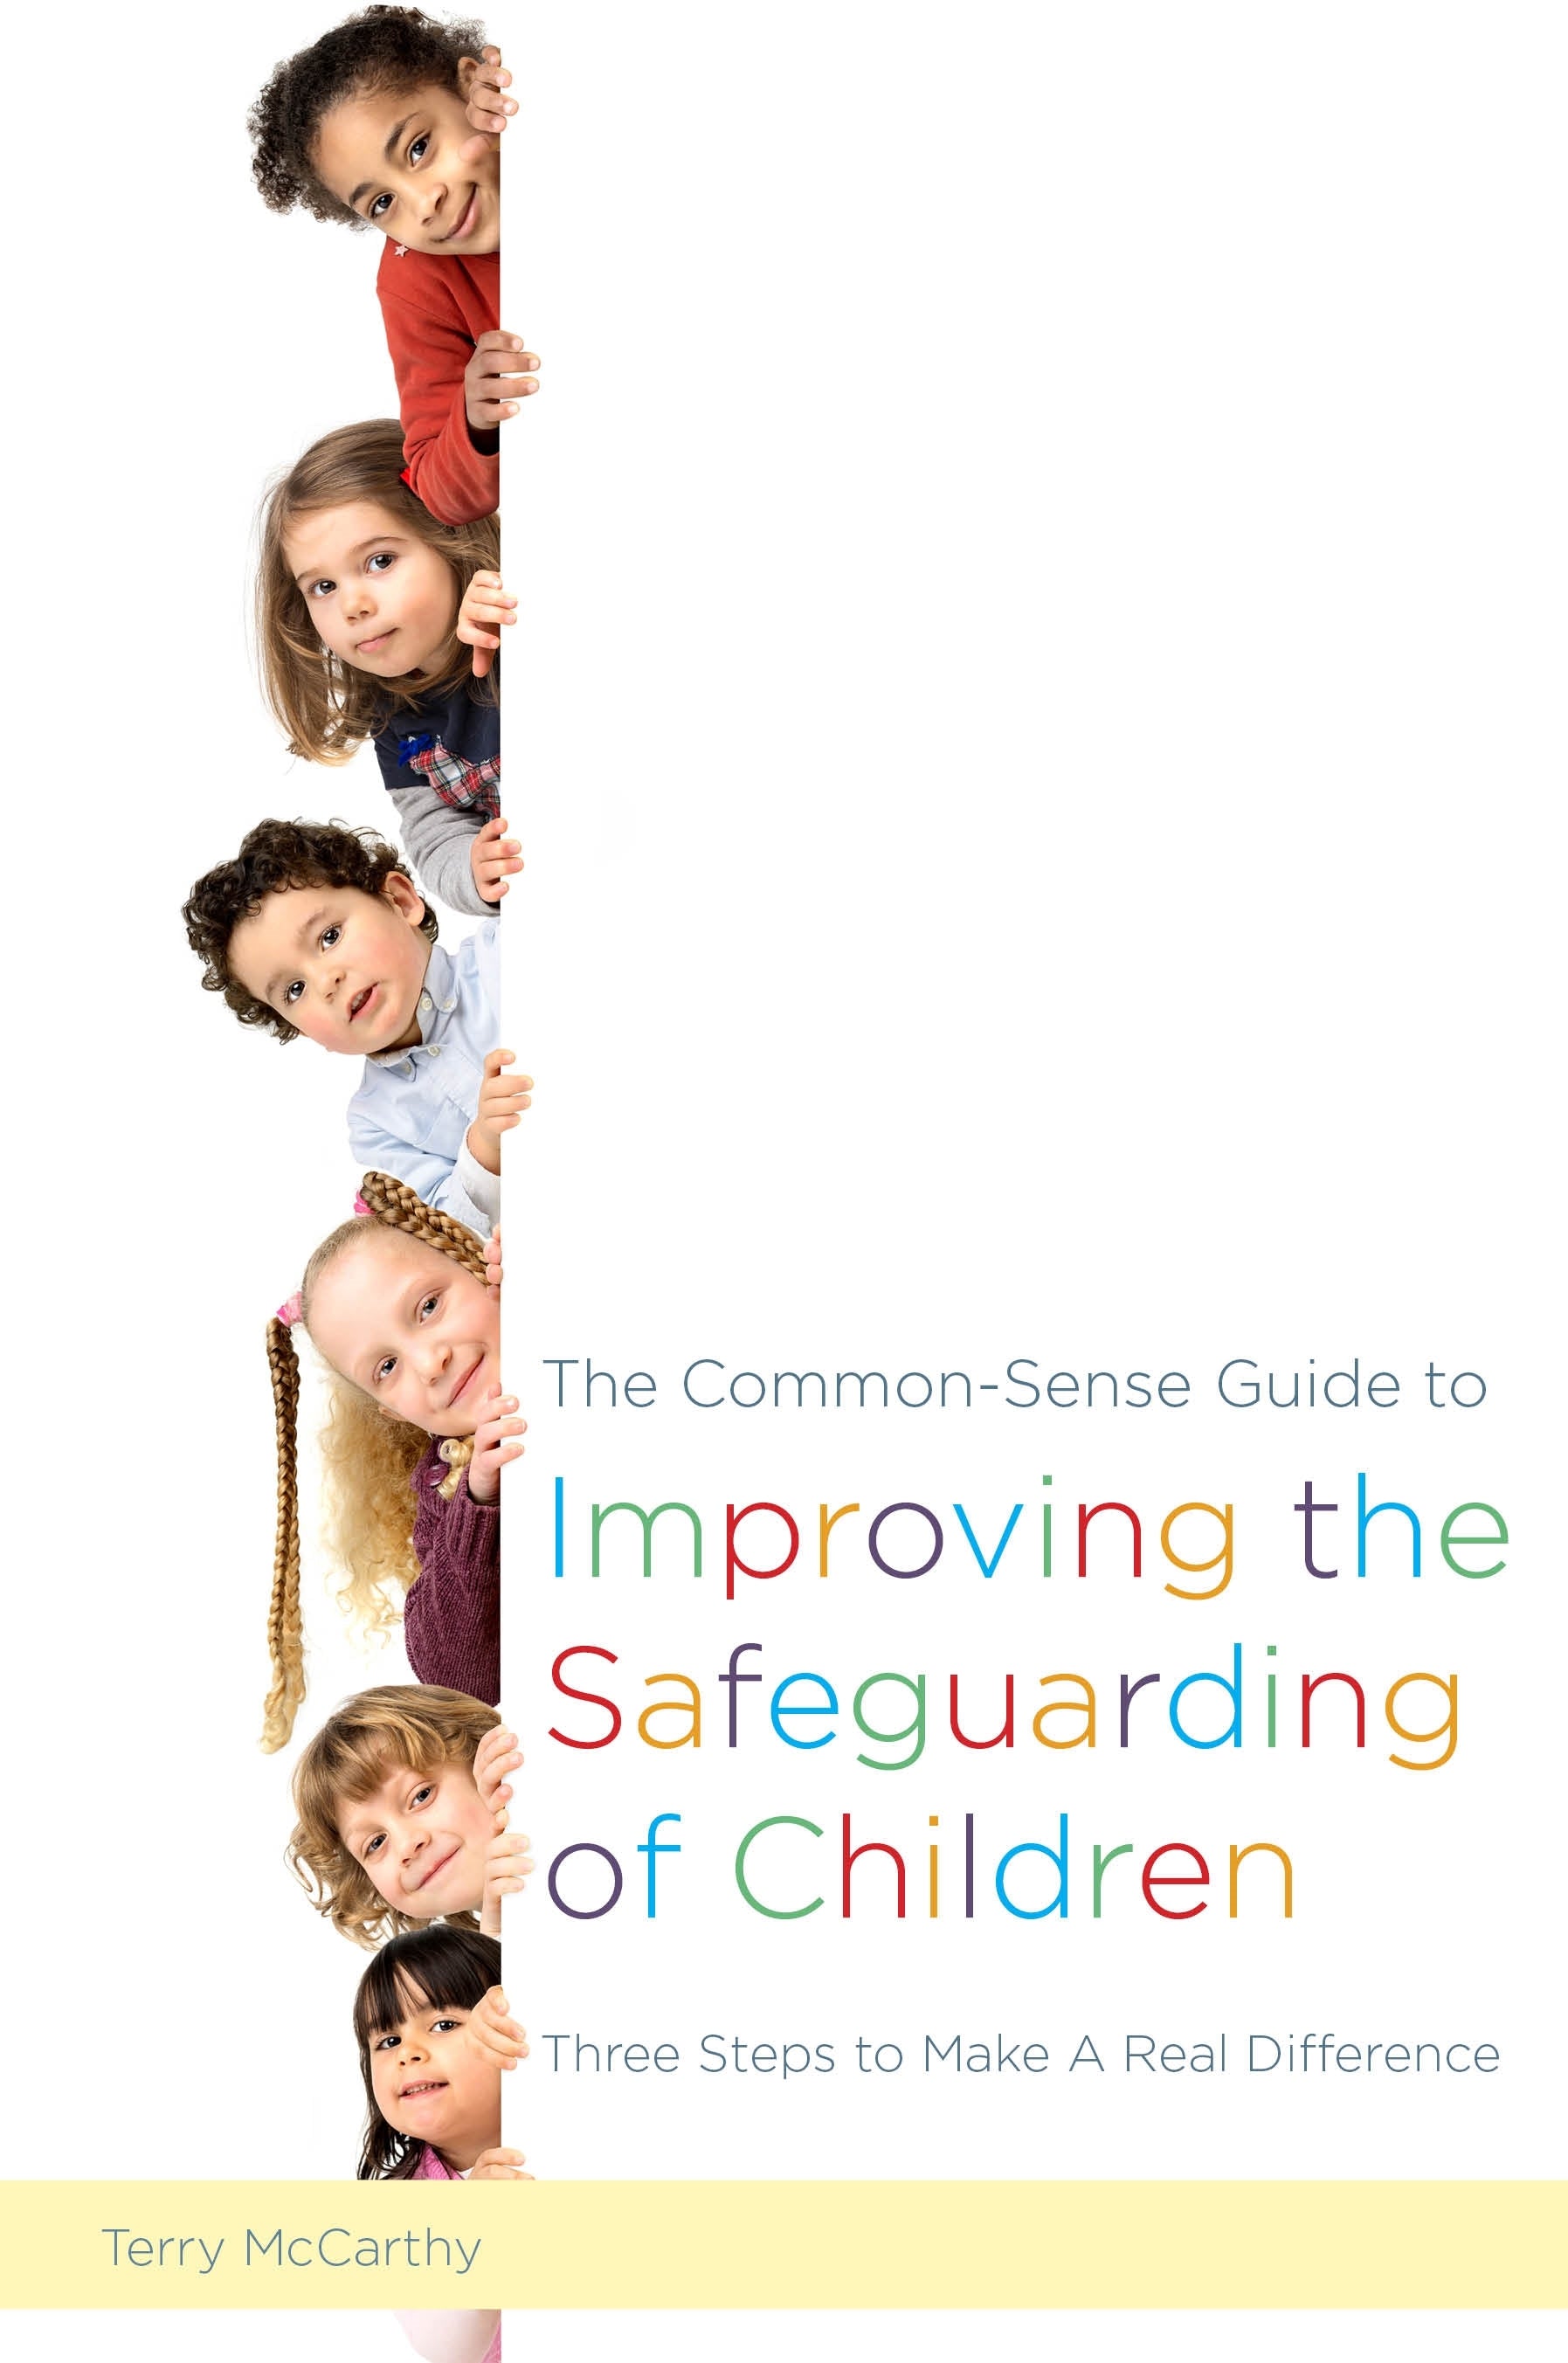 The Common-Sense Guide to Improving the Safeguarding of Children by Terry McCarthy